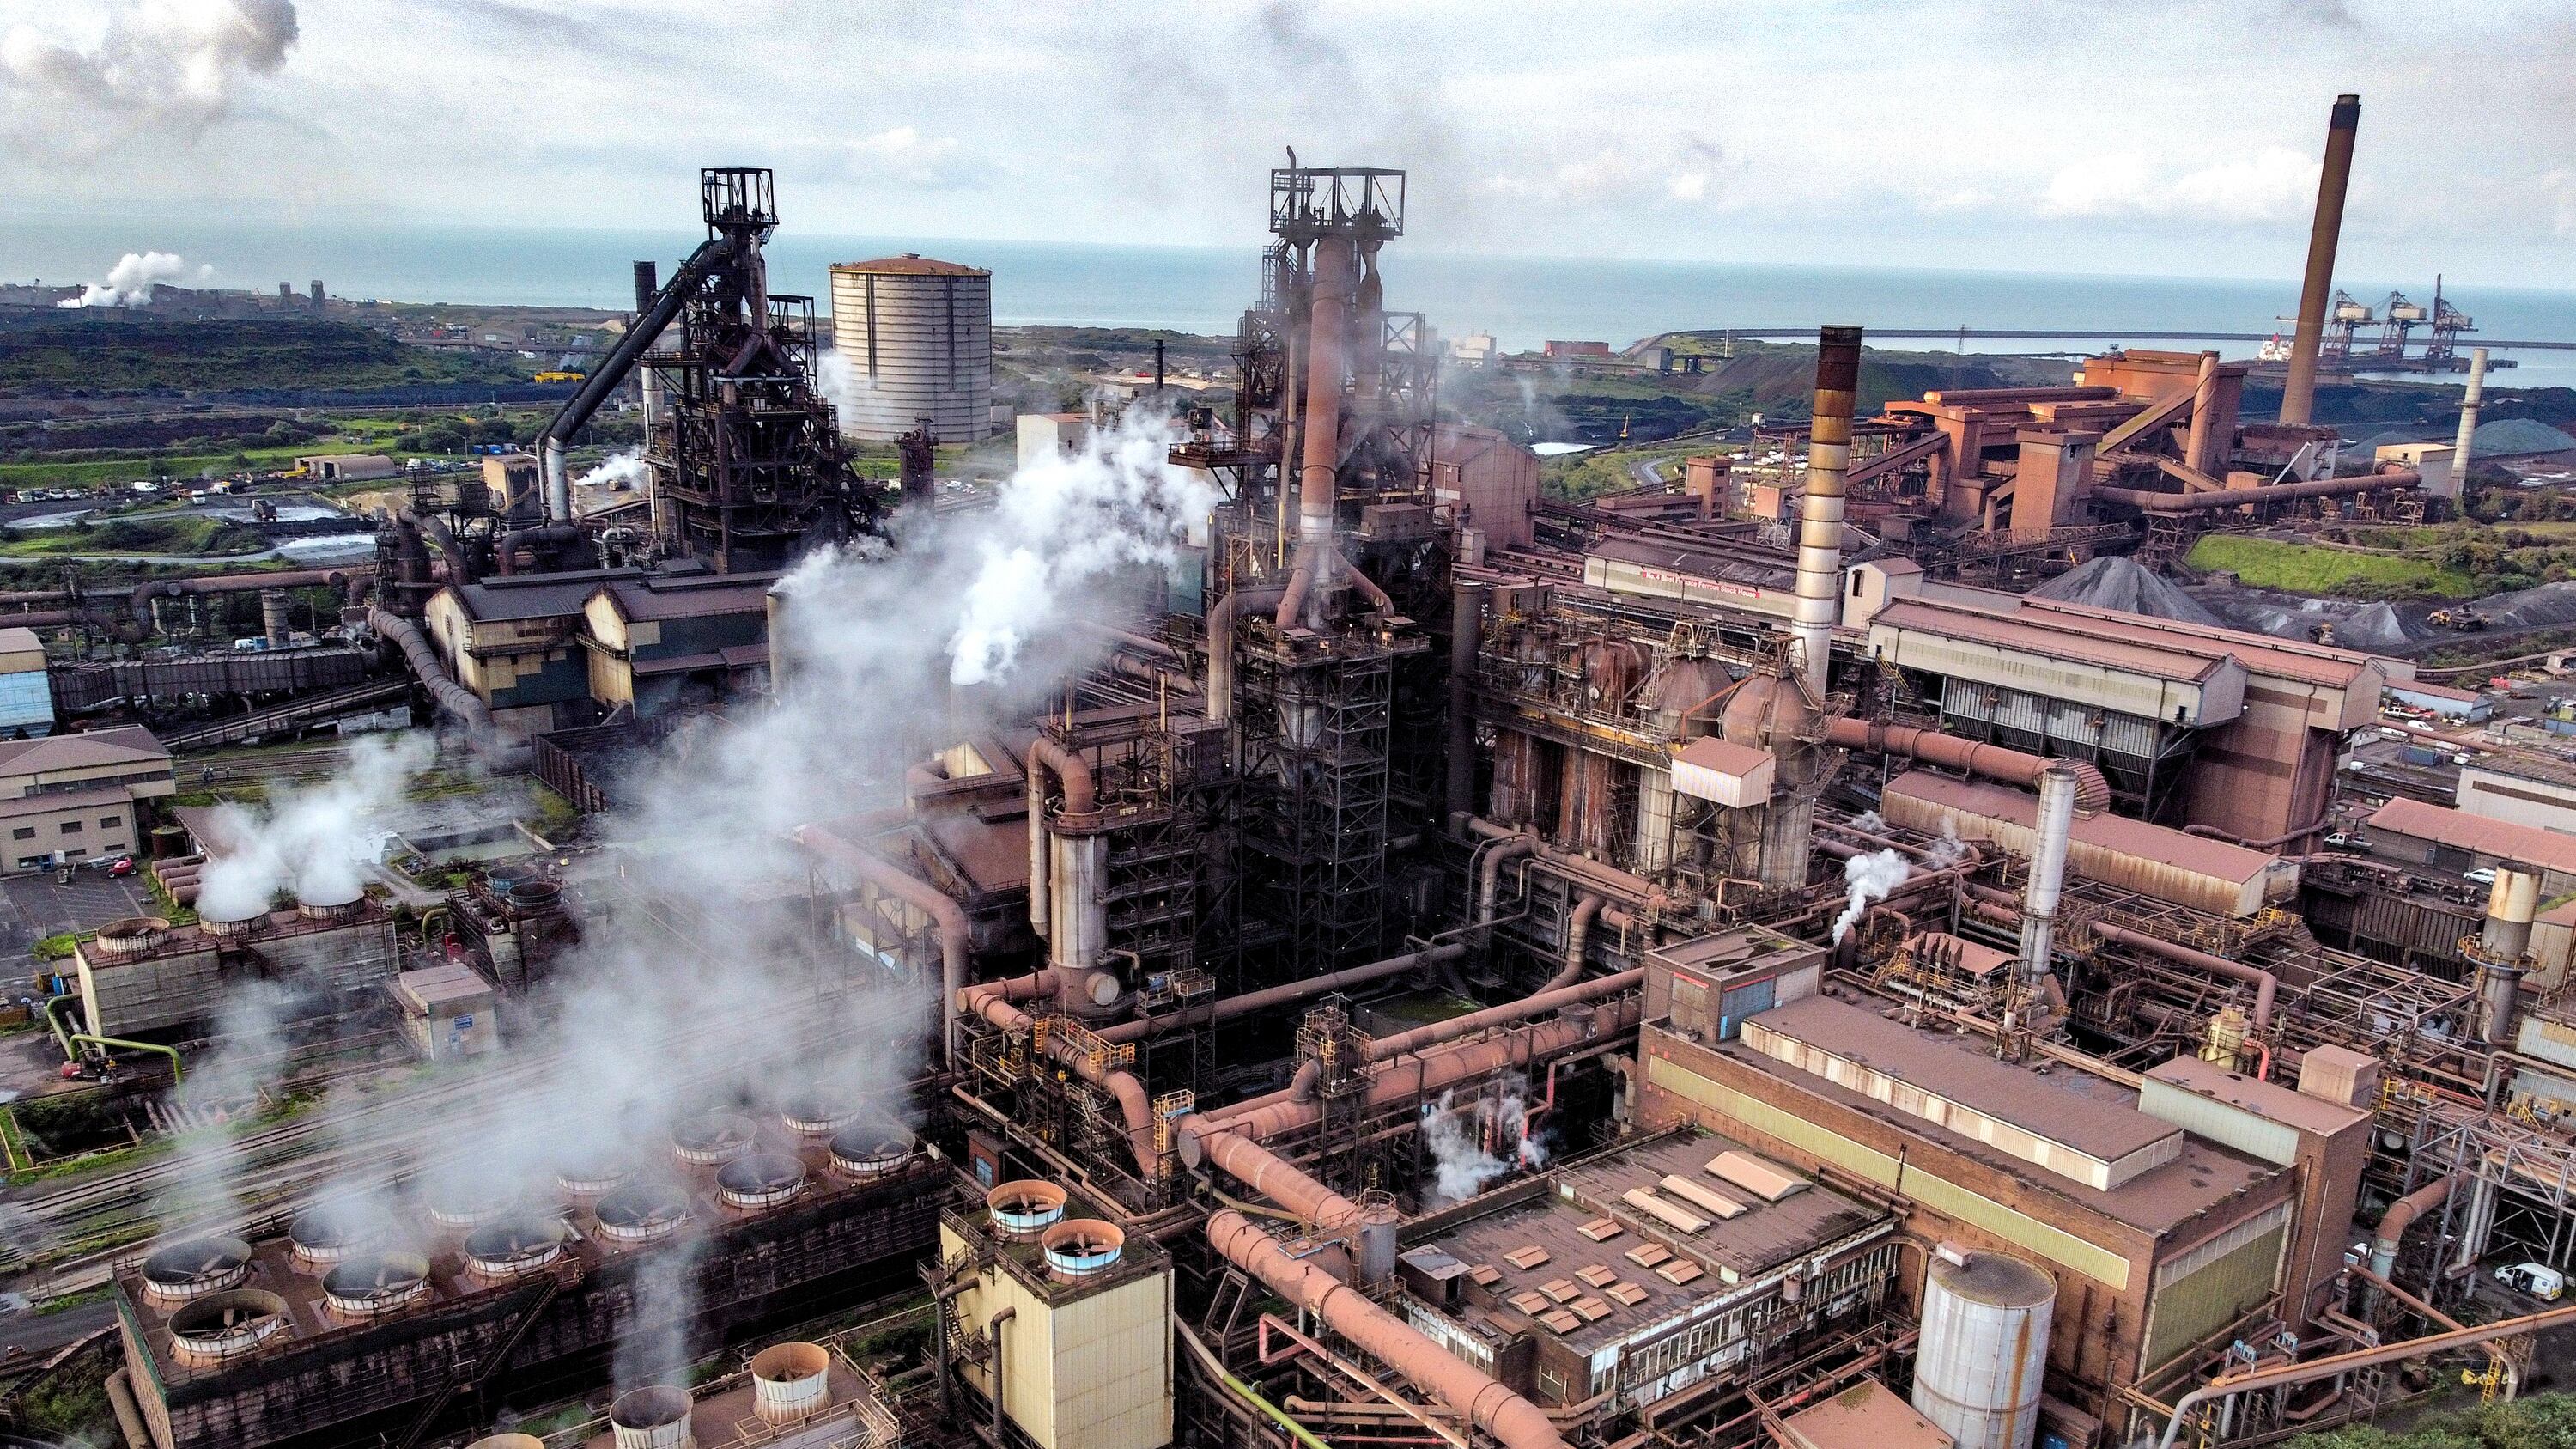 The company is switching to a greener form of steel production which requires fewer staff